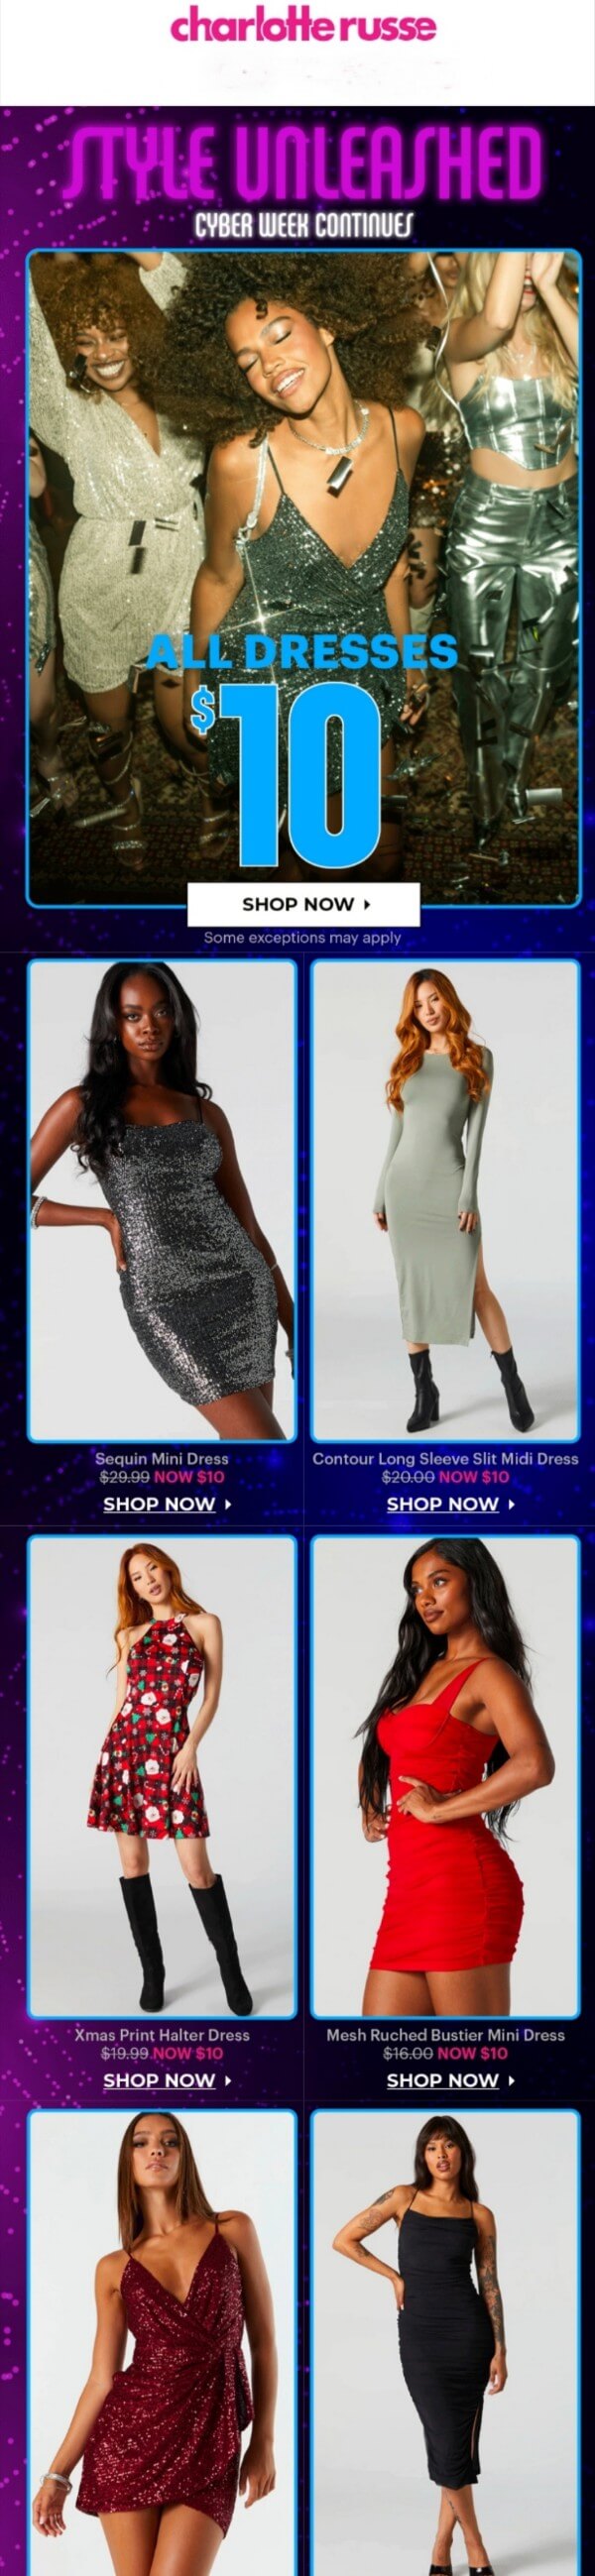 All dresses $10 at Charlotte Russe #charlotterusse